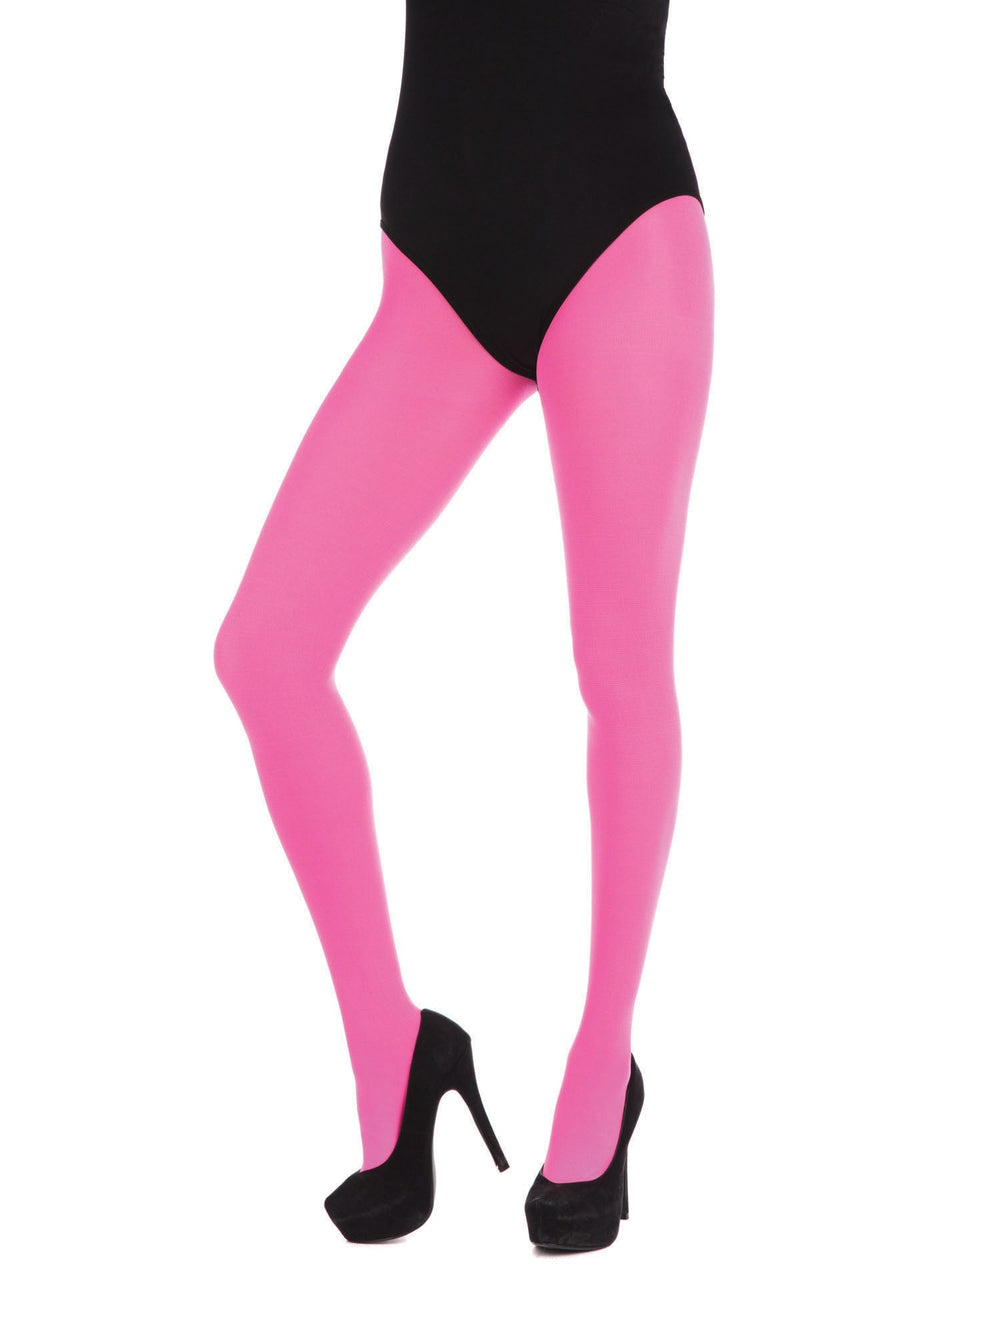 Size Chart Pink Tights Costume Accessory